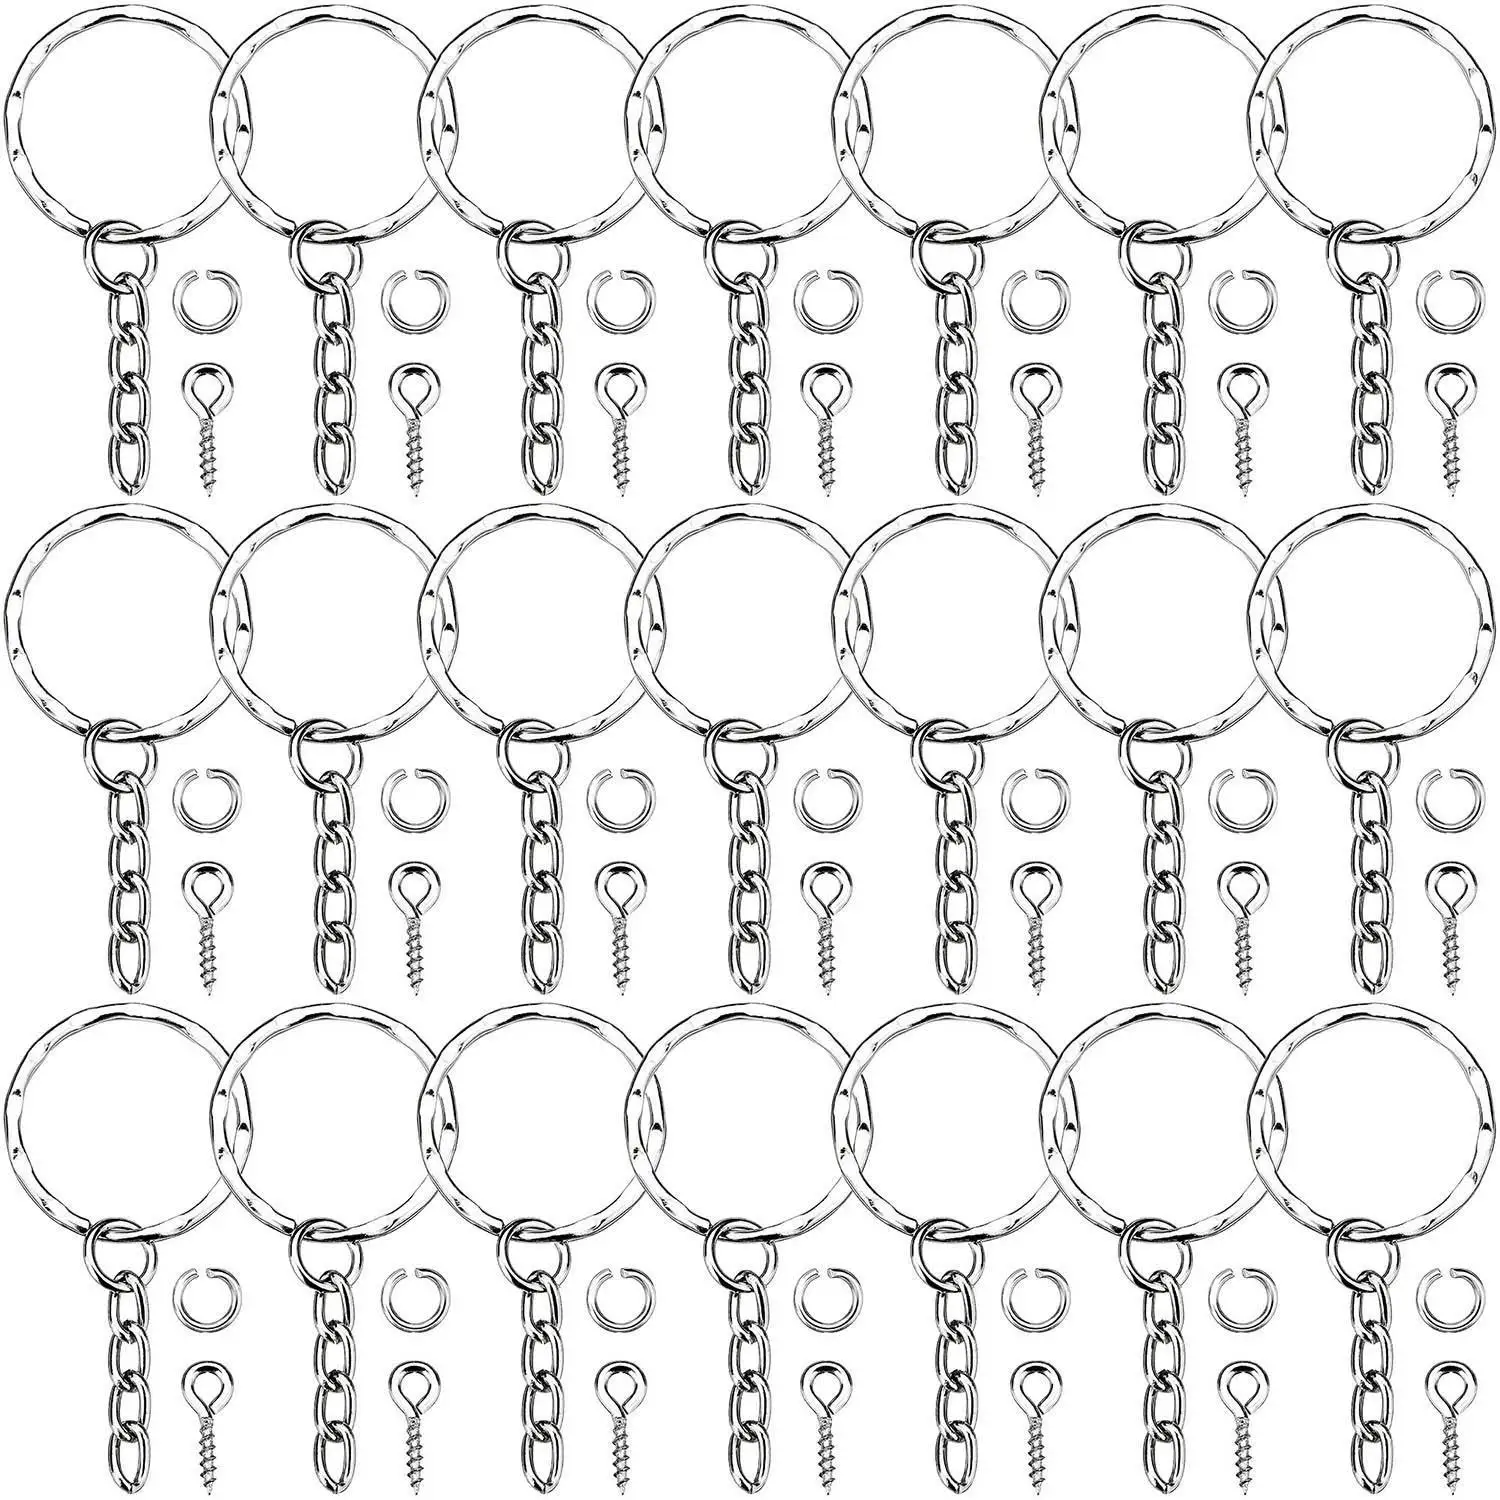 

150pcs Key Chain Rings with Open Jump Rings Screw Eye Pins Crafts and Keychain Making Supplies DIY Crafts Jewelry Making